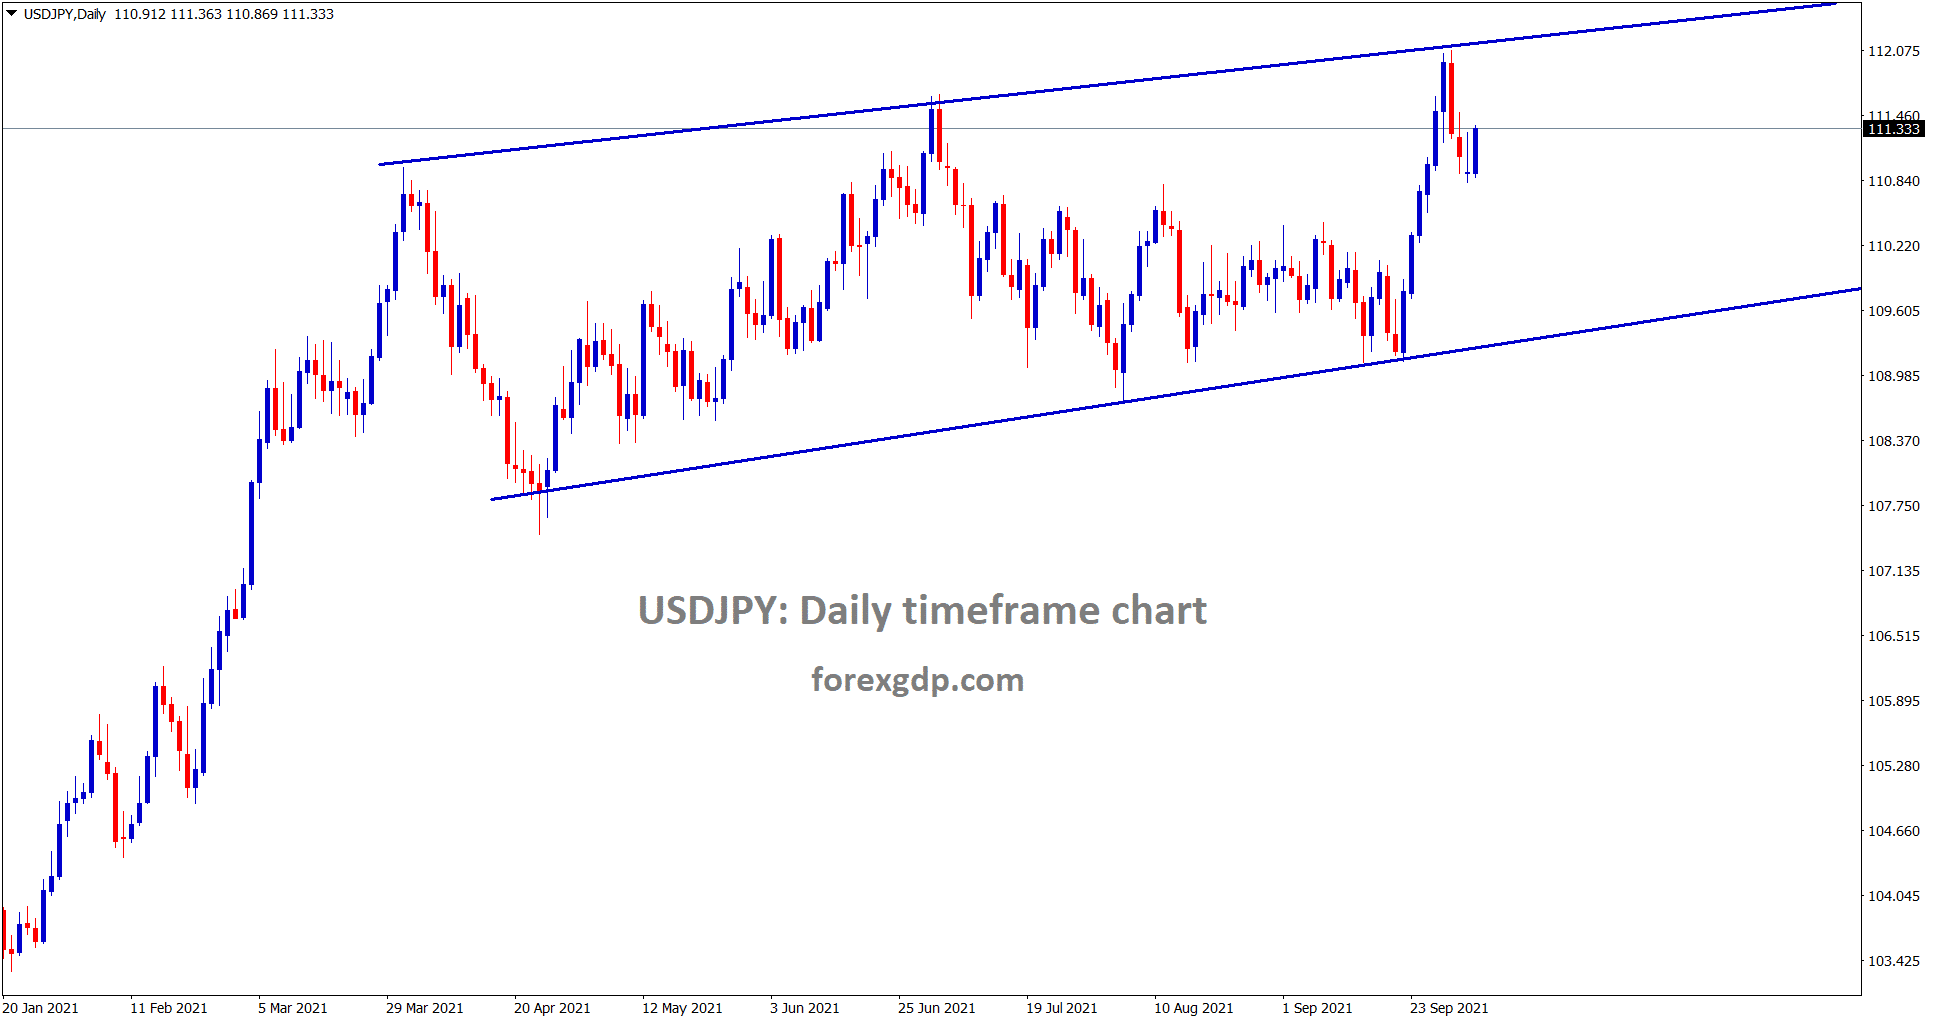 USDJPY is trying to move up again after doing a minimum correction